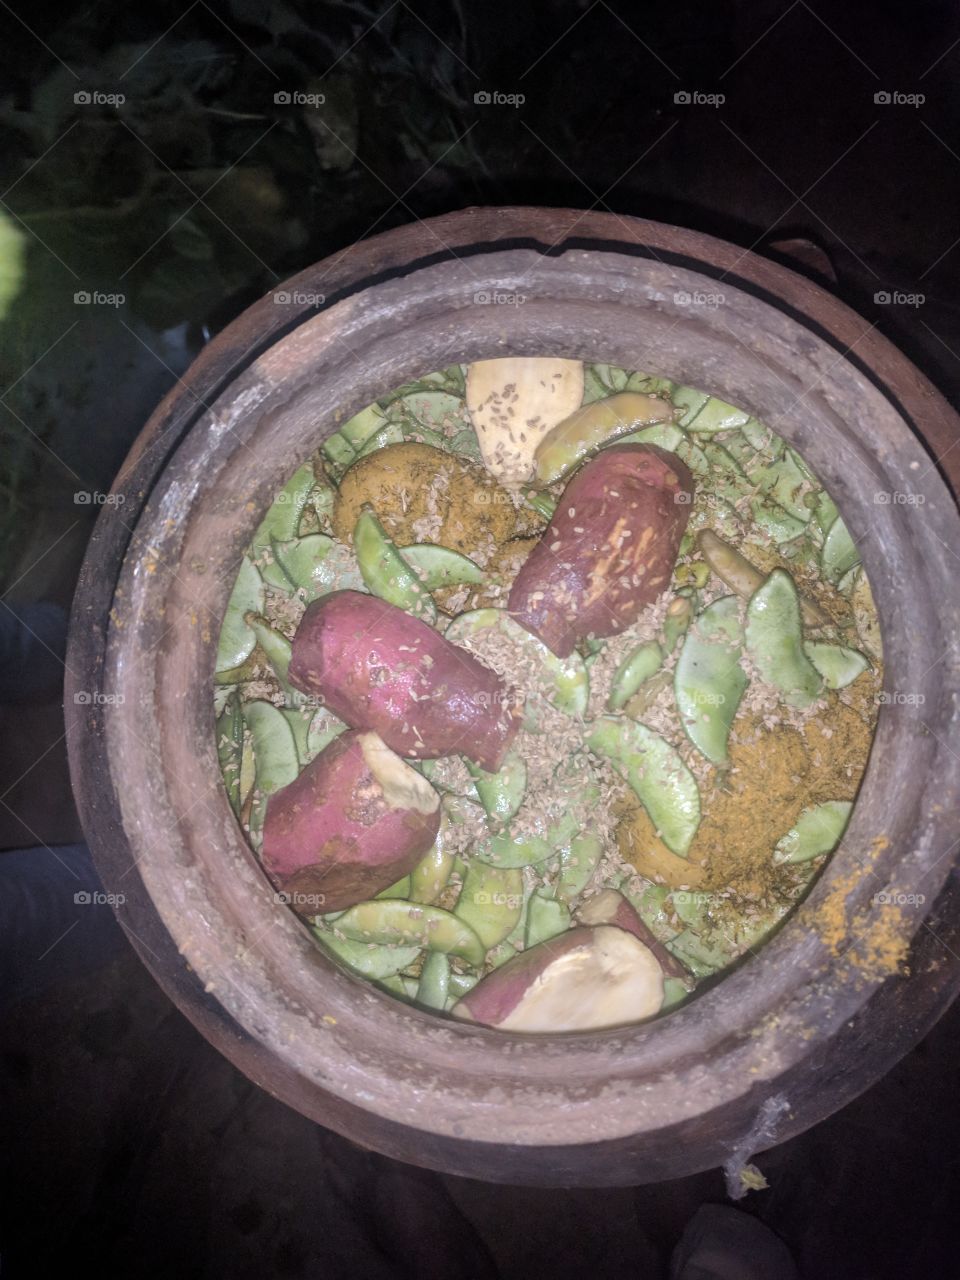 POPTI = VEGETABLES IN A CLAY POT, NATURALLY COOKED BY FIRE AROUND THE CLAY POT, TASTY AND YUMMY, mainly available during winter seasons in interior of Maharashtra state , India!